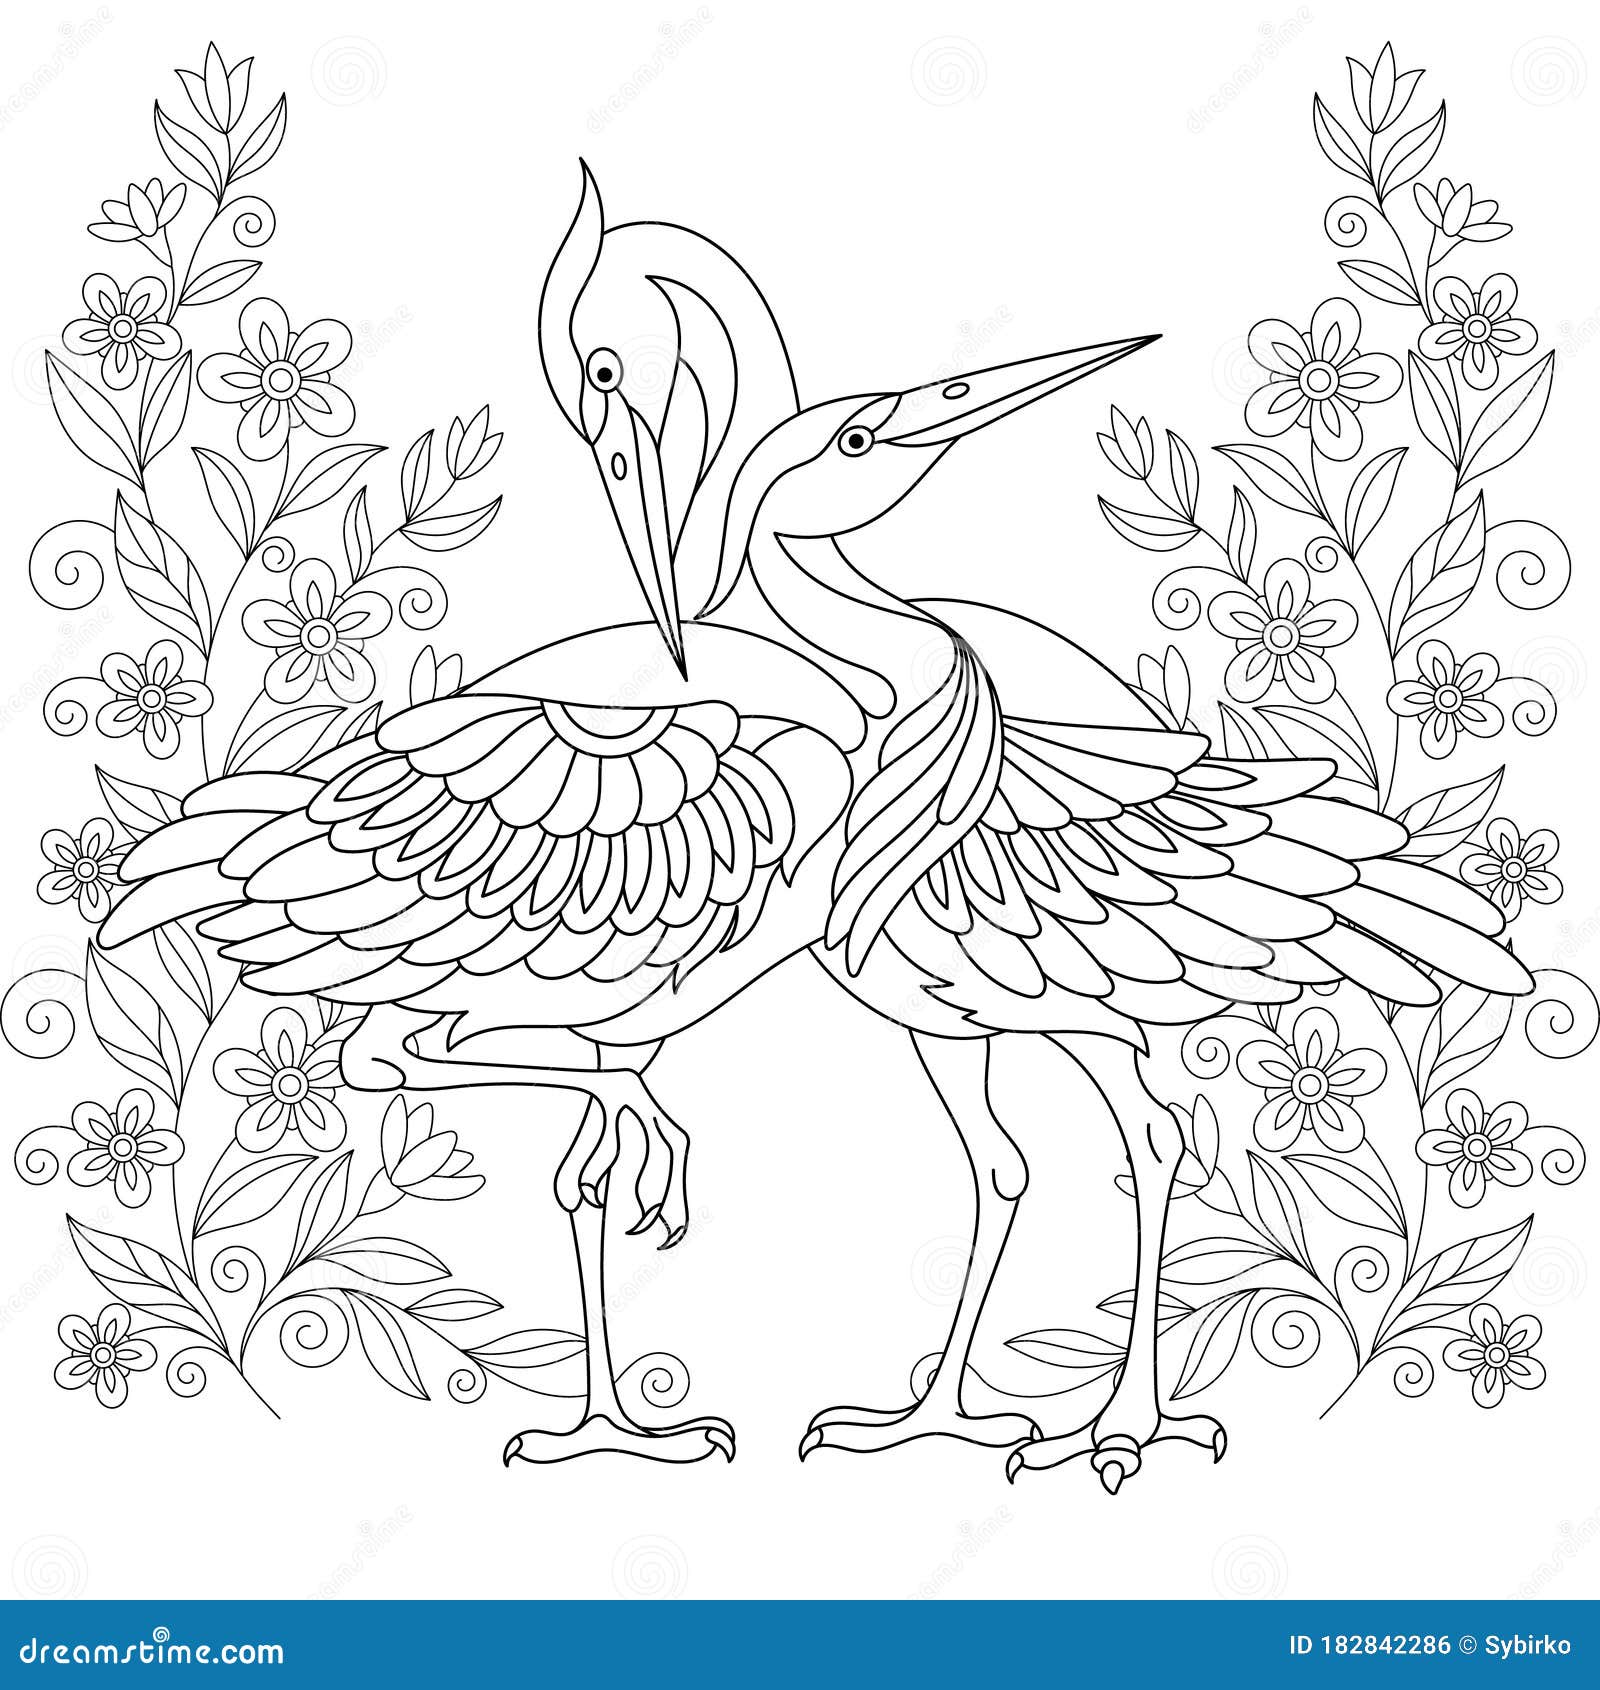 Coloring page with two birds in love stock vector